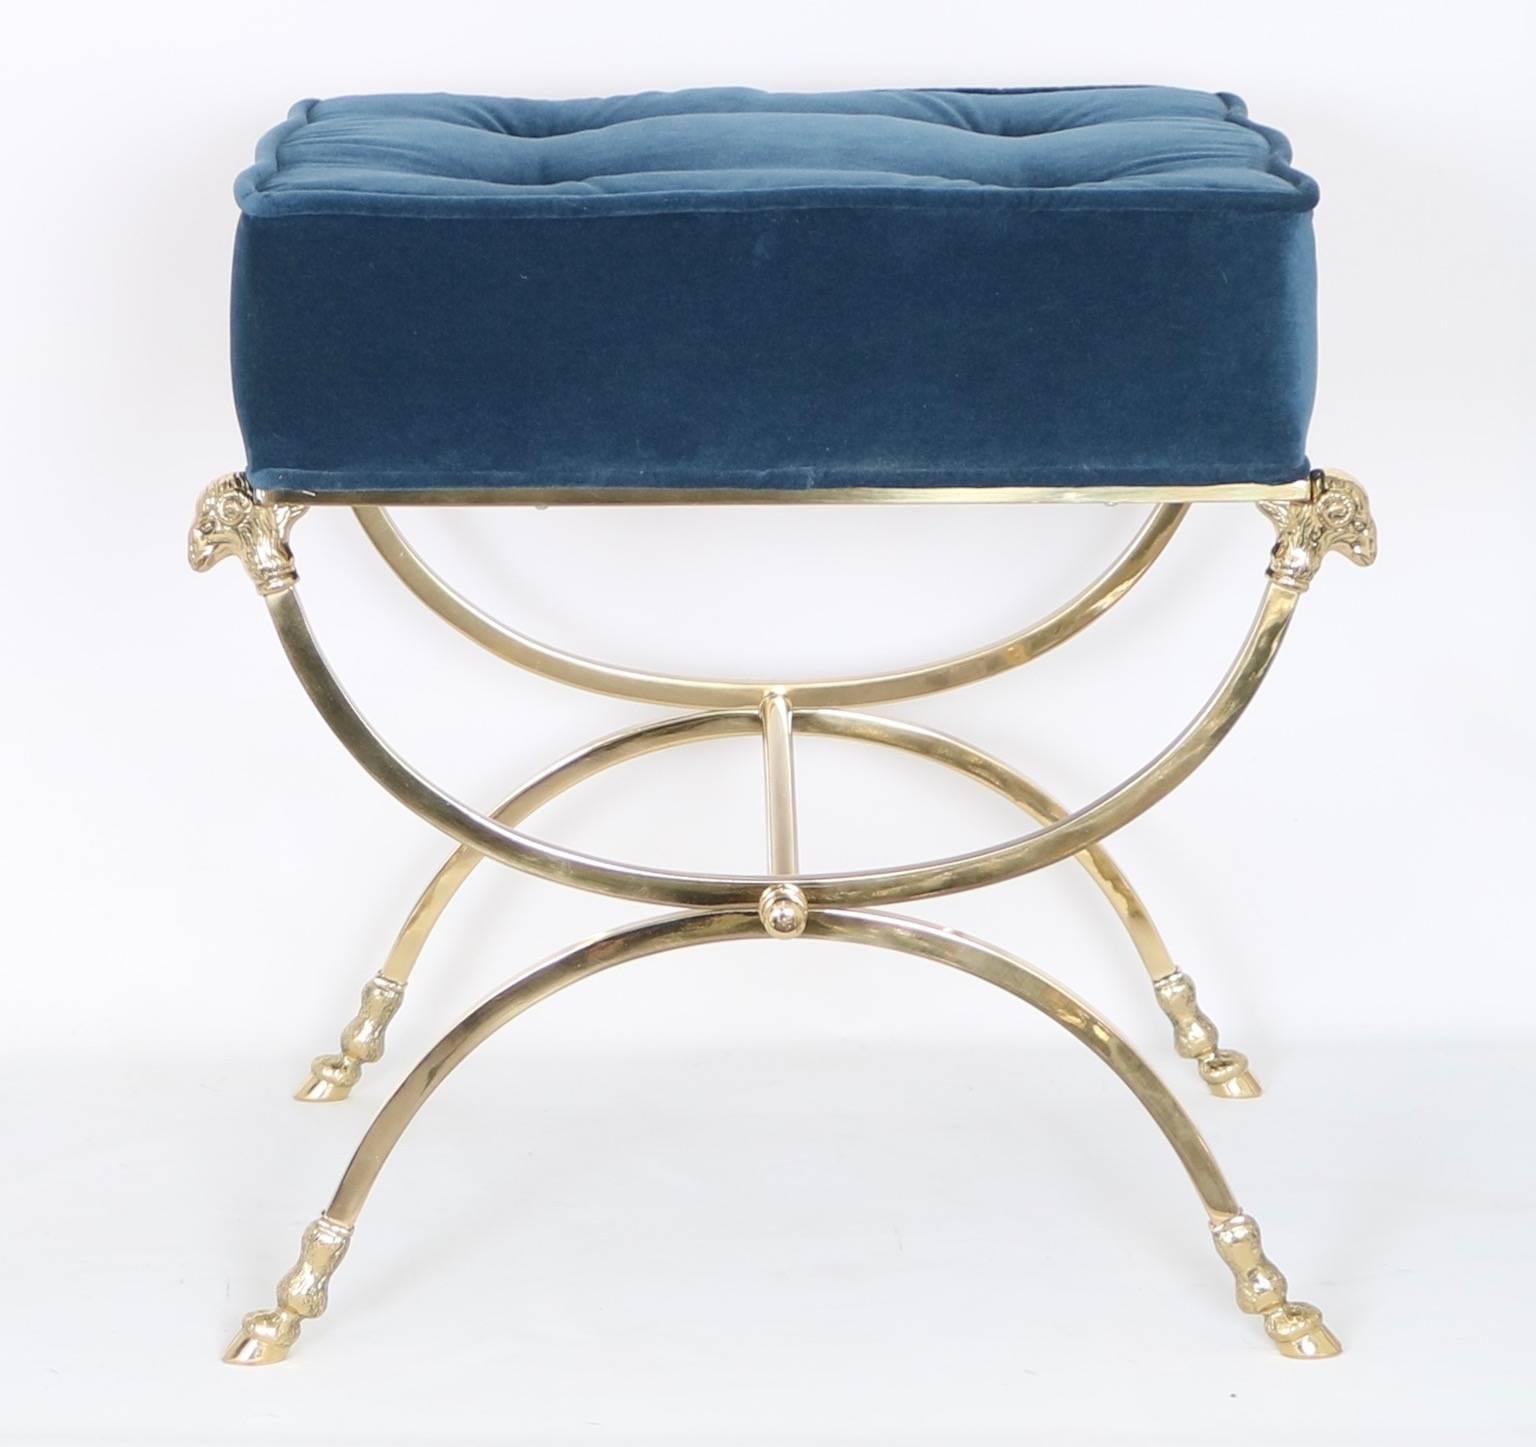 Polished Hollywood Regency Italian Brass Campaign Stool in the Style of Maison Jansen